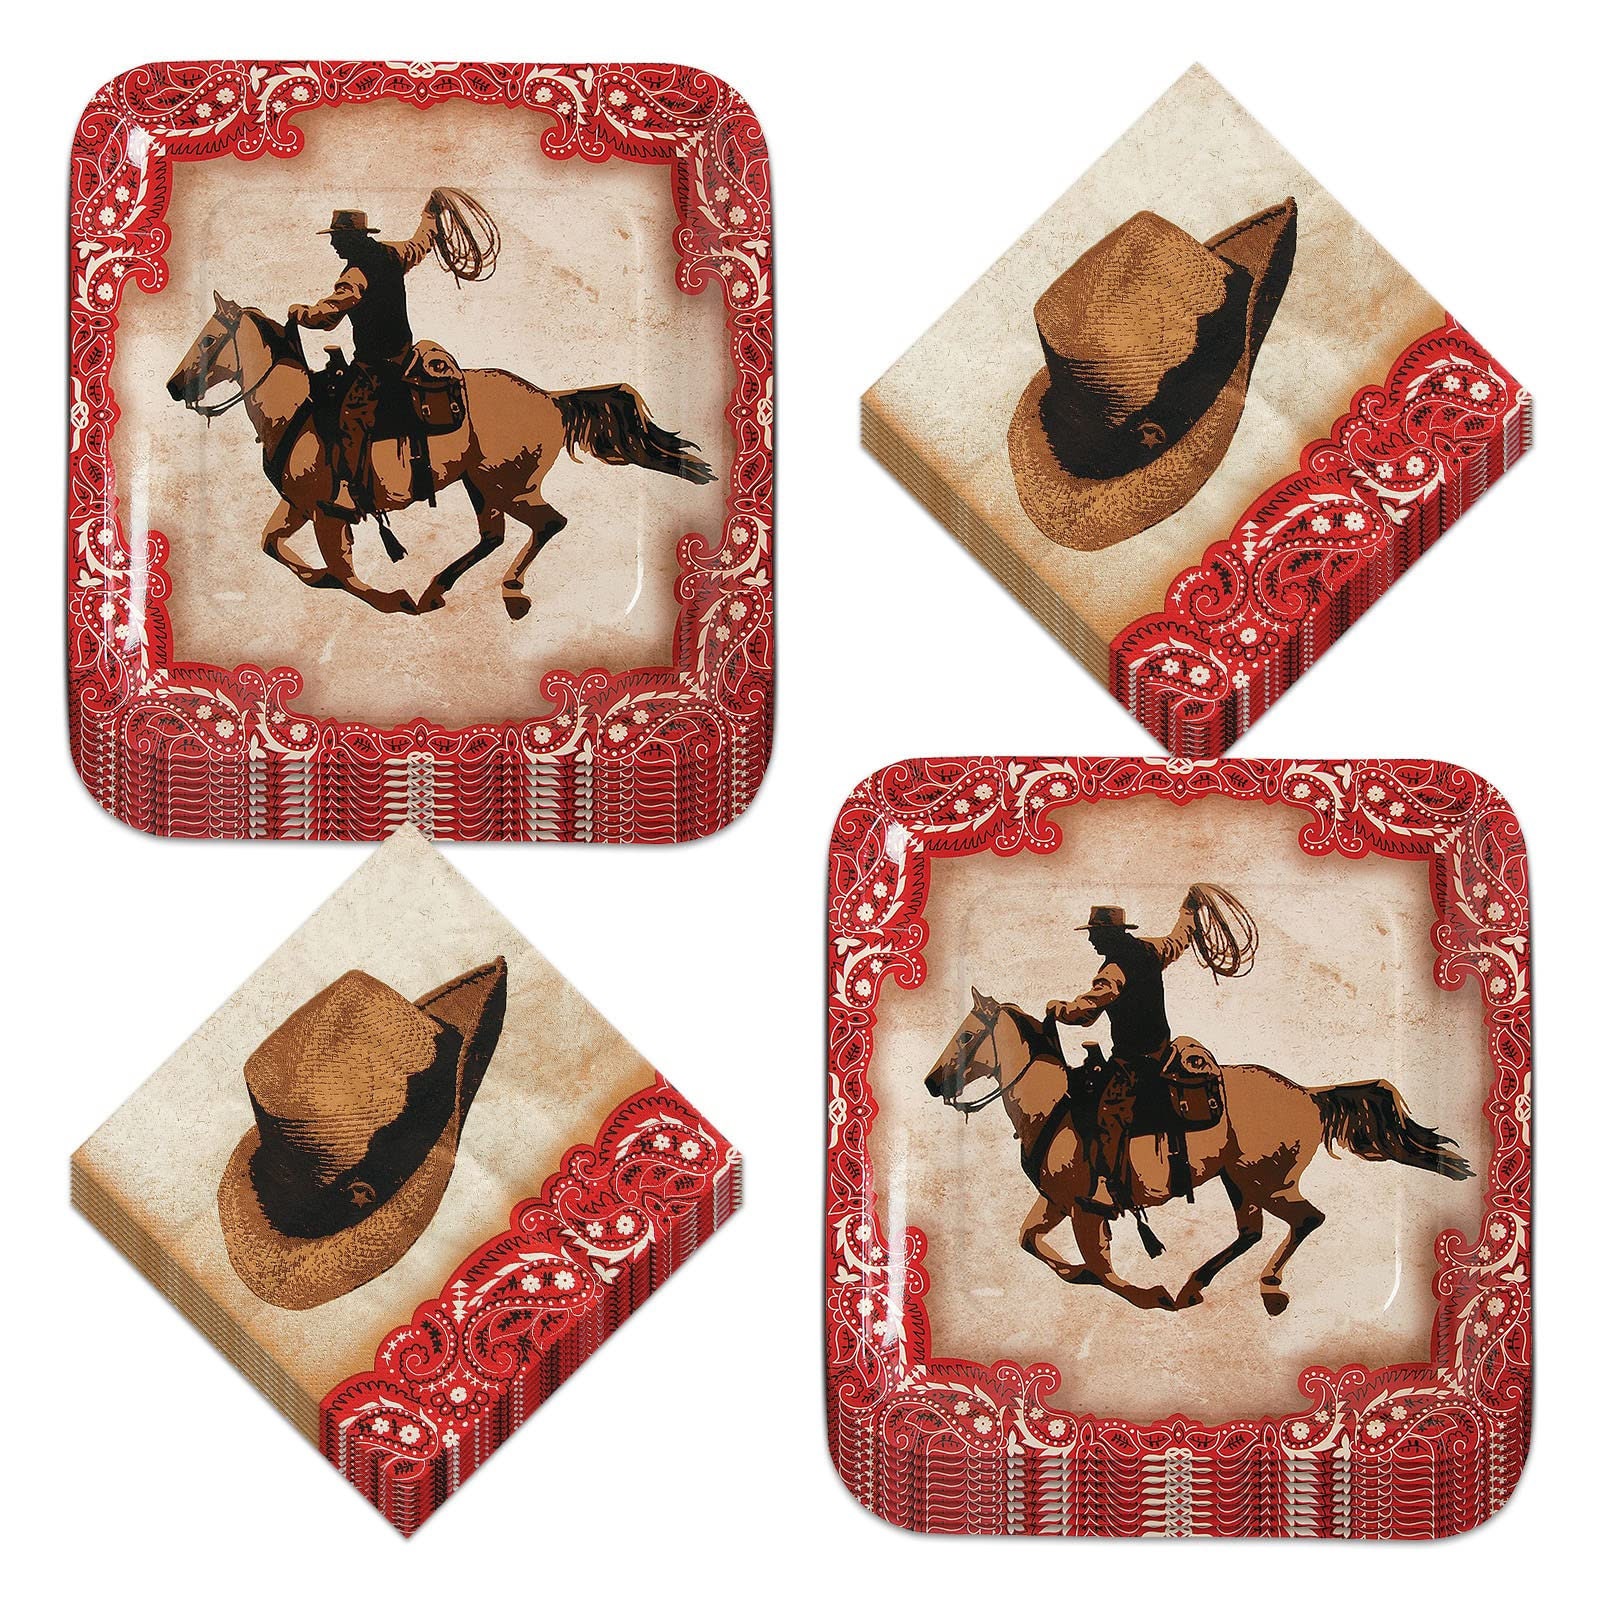 Western Party Supplies - Horse and Wild Western Rider Paper Dinner Plates and Cowboy Hat Luncheon Napkins (Serves 16)